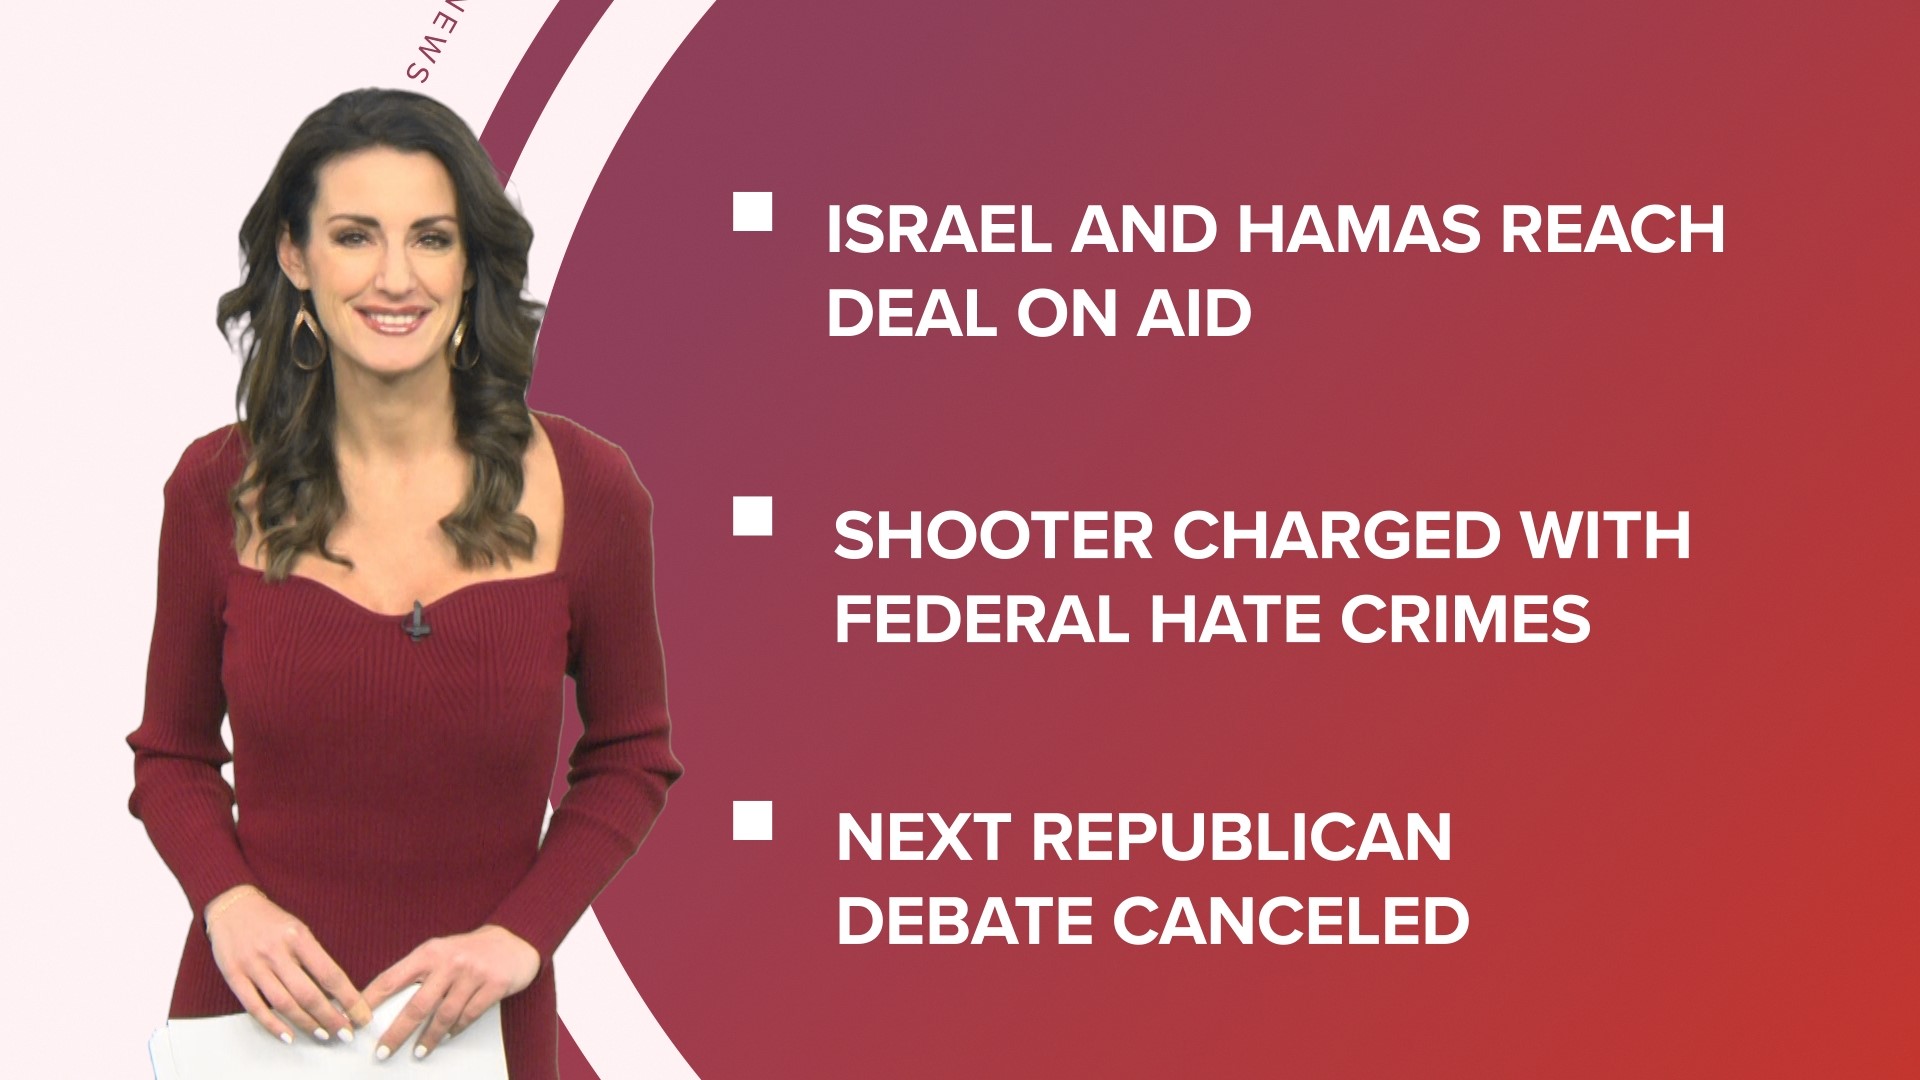 A look at what is happening in the news from the 2022 Club Q shooter facing federal hate crime charges to tackling overdraft fees and the 2024 Coachella lineup.